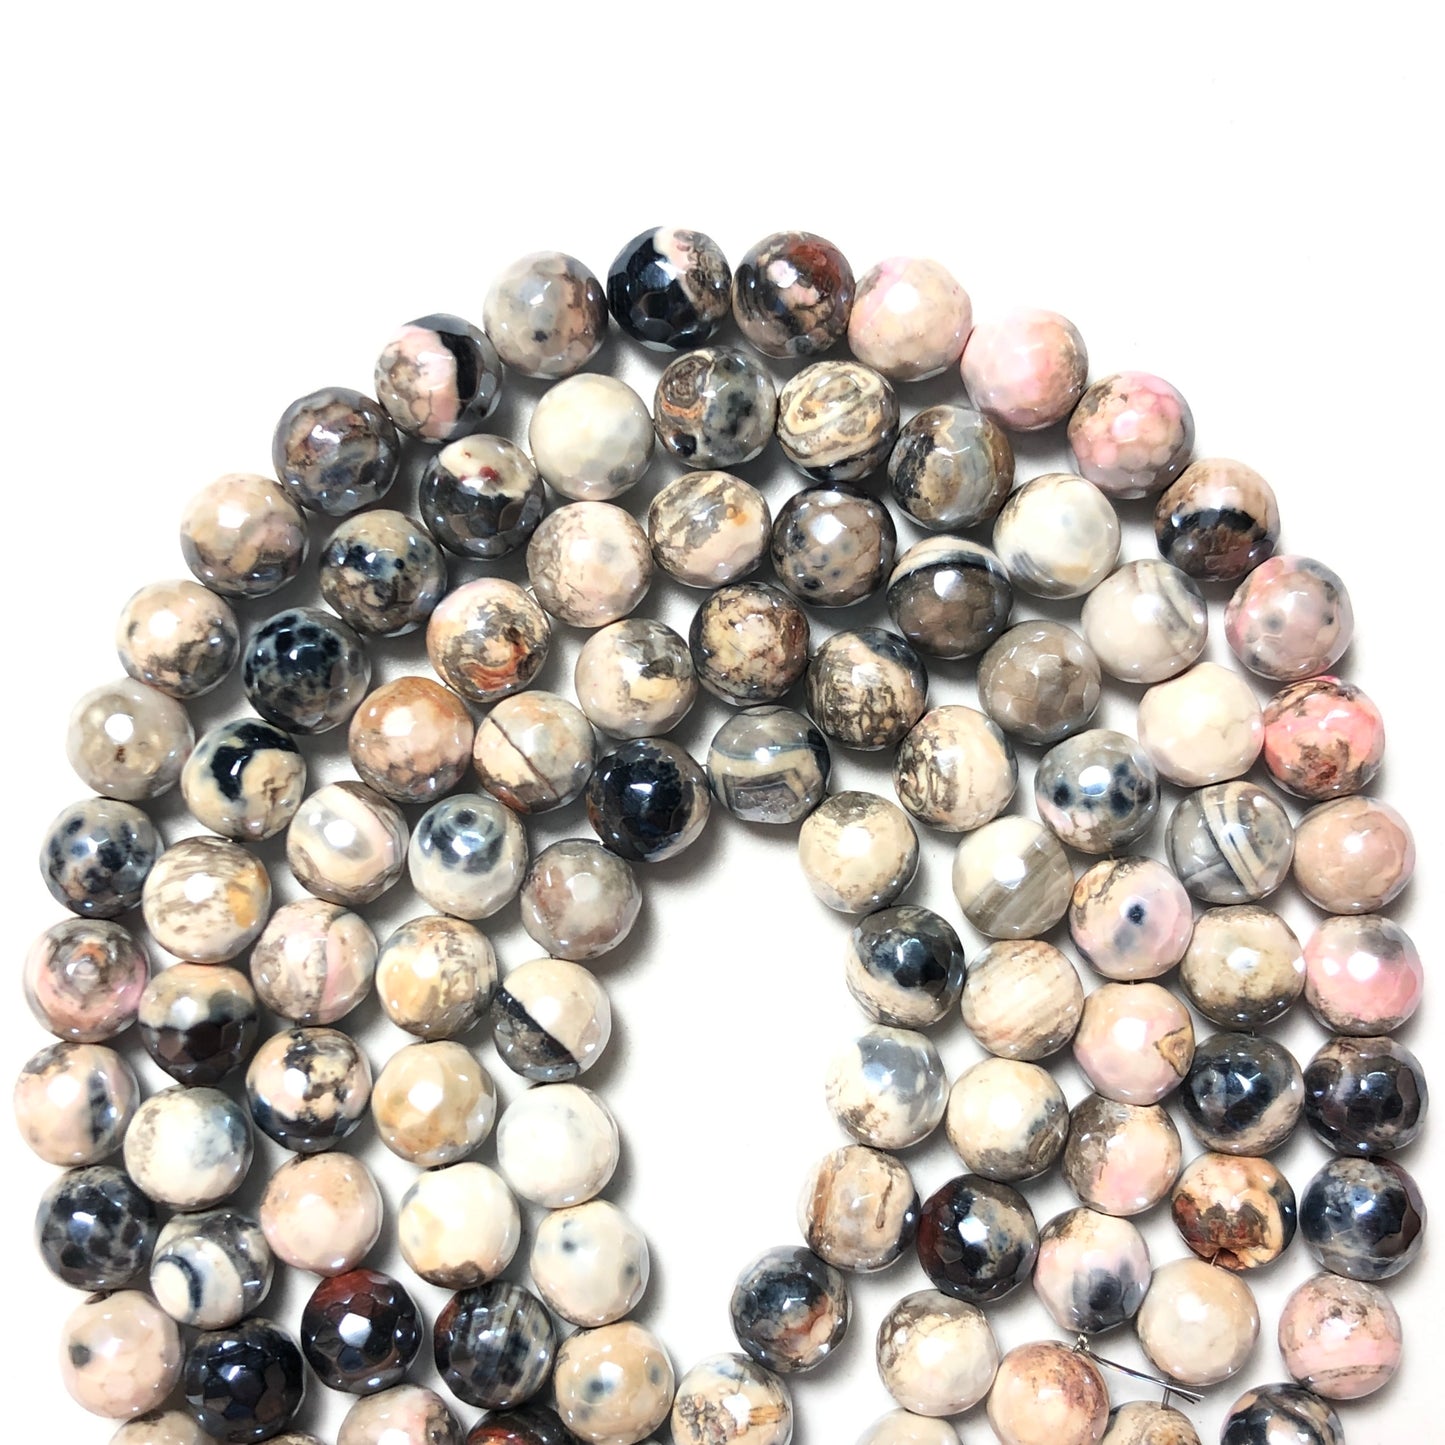 2 Strands/lot 8mm Electroplated Black White Pink Agate Faceted Stone Beads Electroplated Beads Electroplated Faceted Agate Beads New Beads Arrivals Charms Beads Beyond